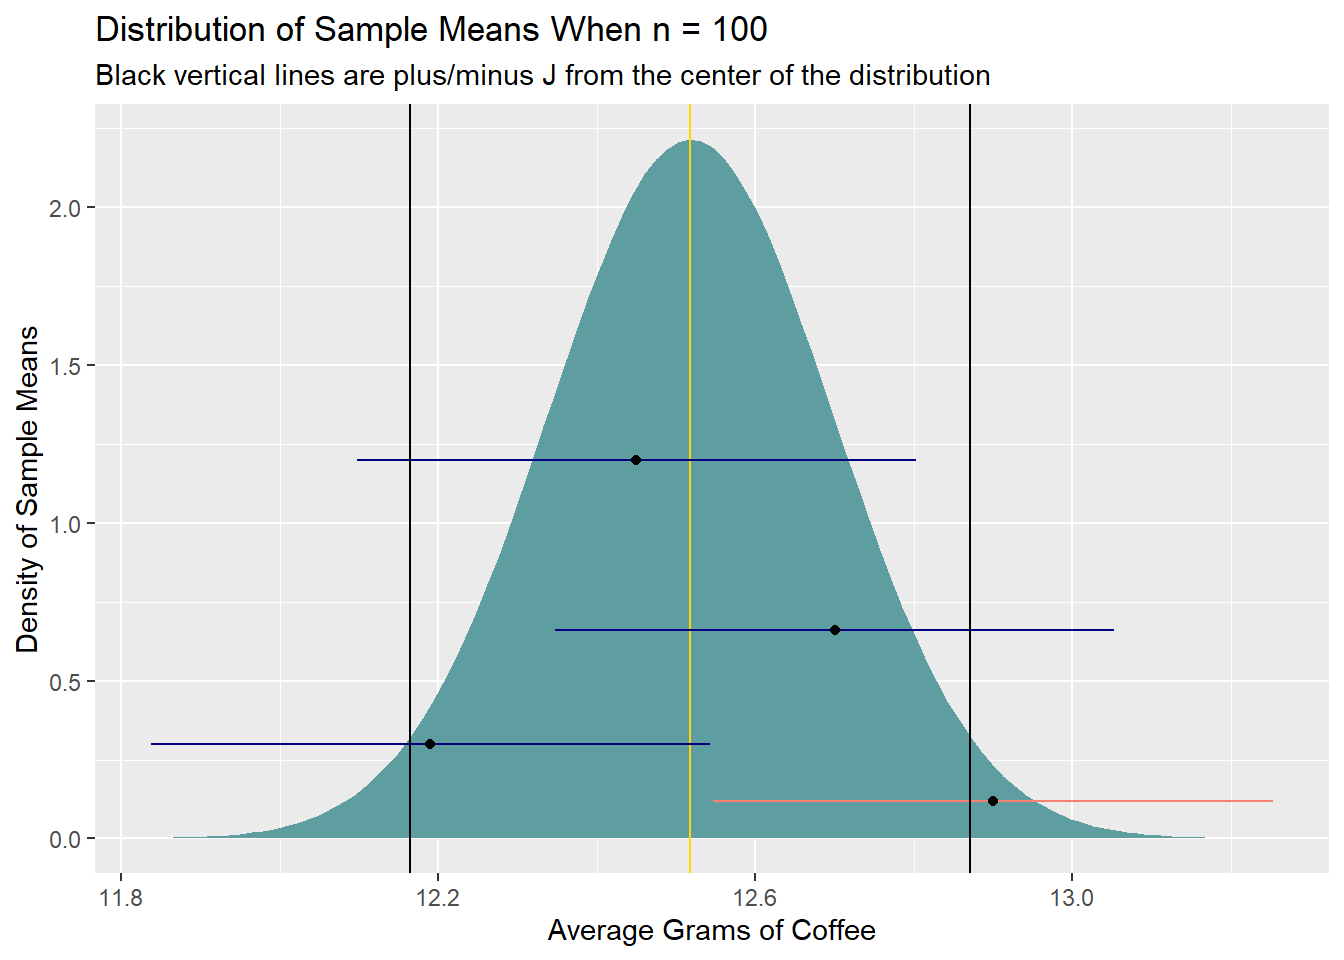 sampling distribution of average grams of coffee used, n = 100 per sample, with several confidence intervals superimposed around various sample means